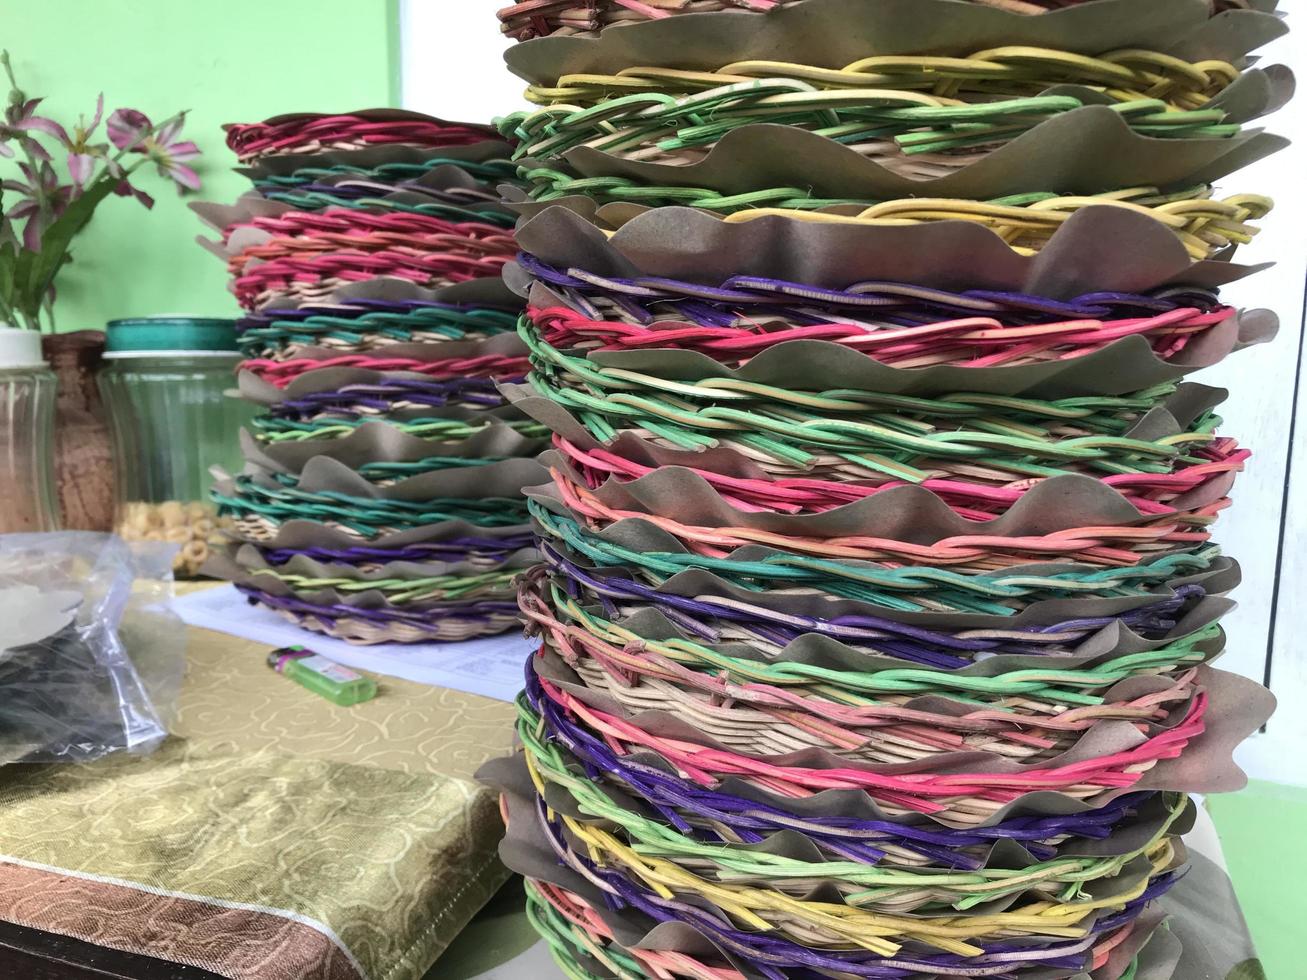 plates made of woven bamboo for Eid to make it more practical photo